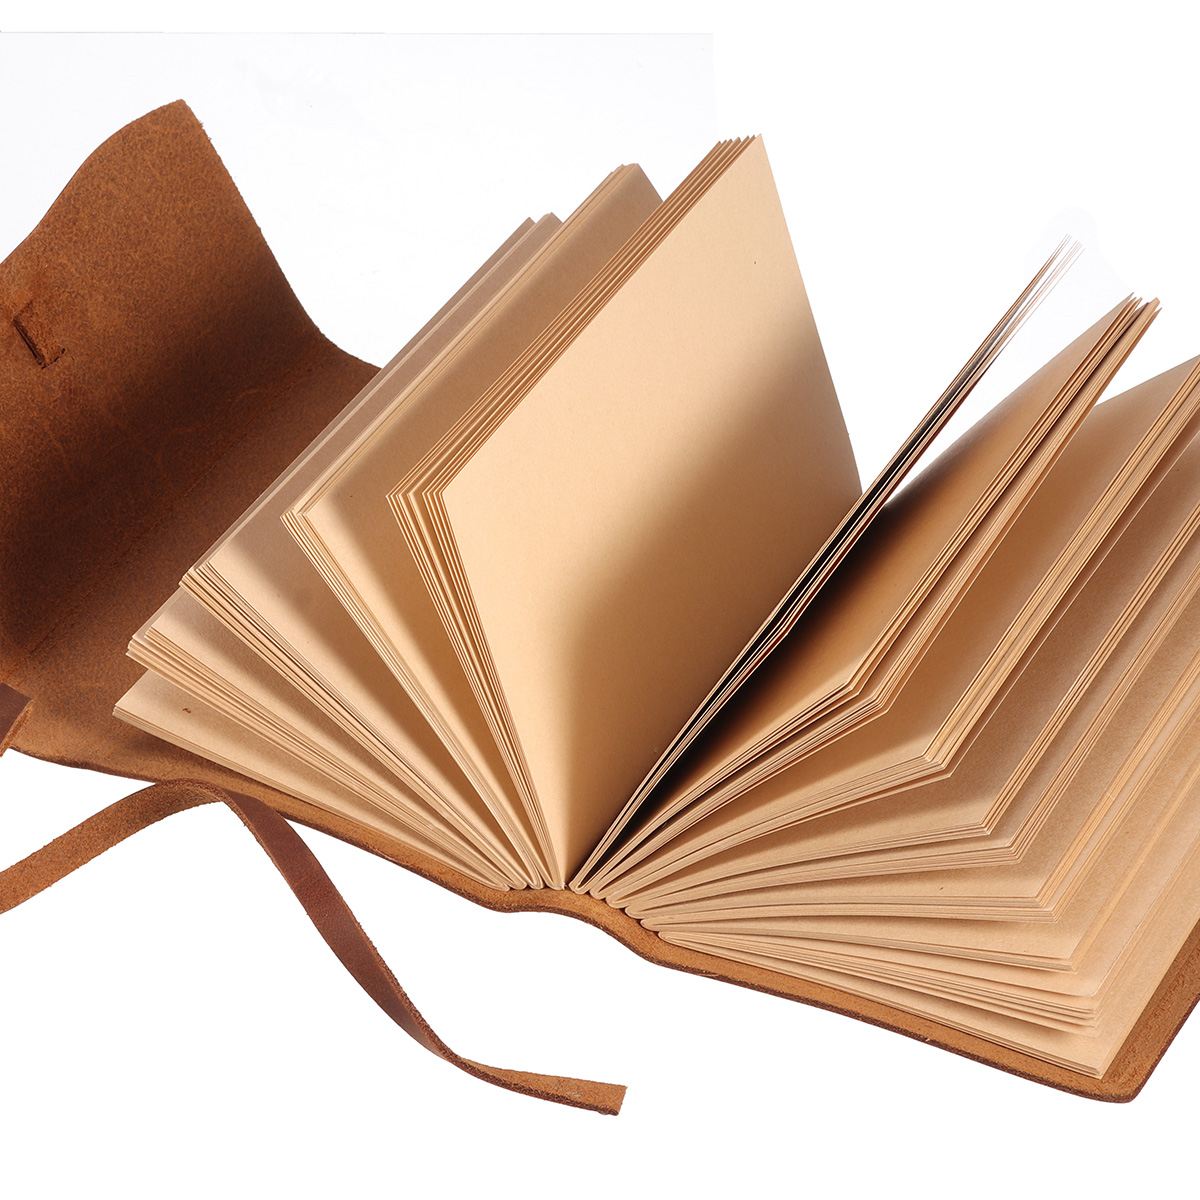 Find Thick Genuine Leather Journal Book 400 Pages Blank Paper Notebook Kraft Notepad Gift School Office Supplies 165mm*115mm*40mm for Sale on Gipsybee.com with cryptocurrencies